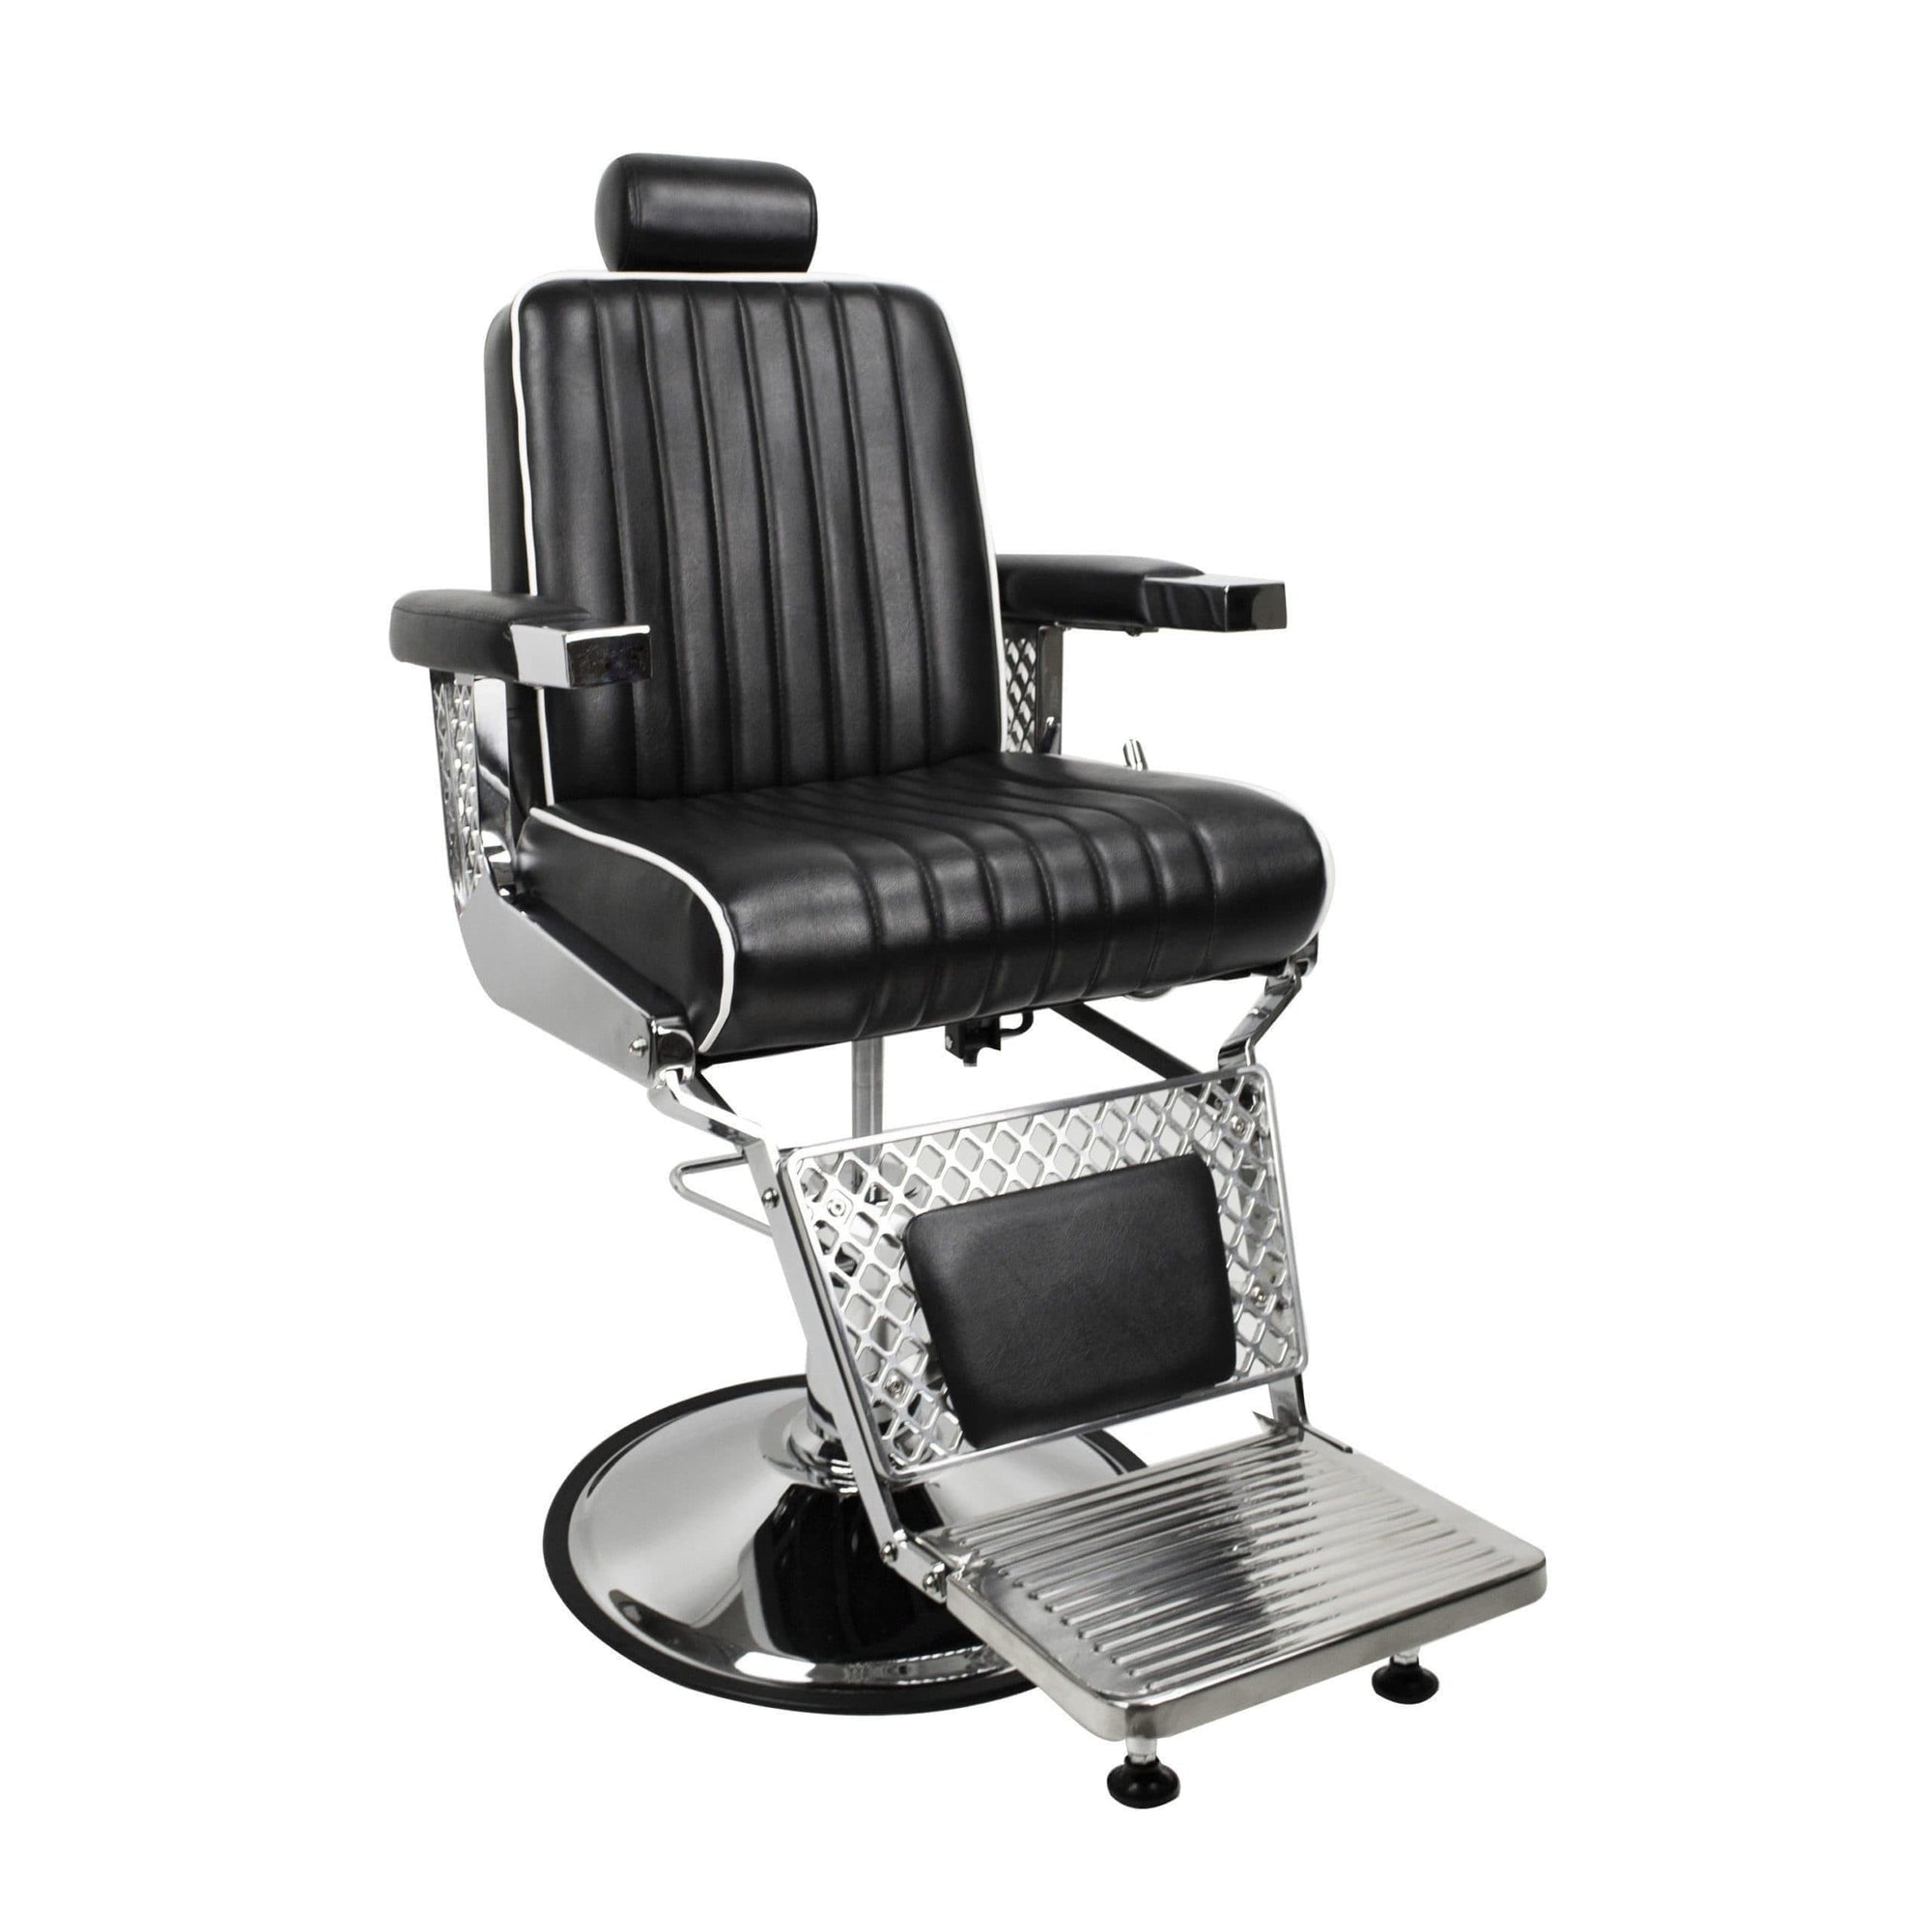 Berkeley Berkeley Fitzgerald Barber Chair Barber Chairs - ChairsThatGive